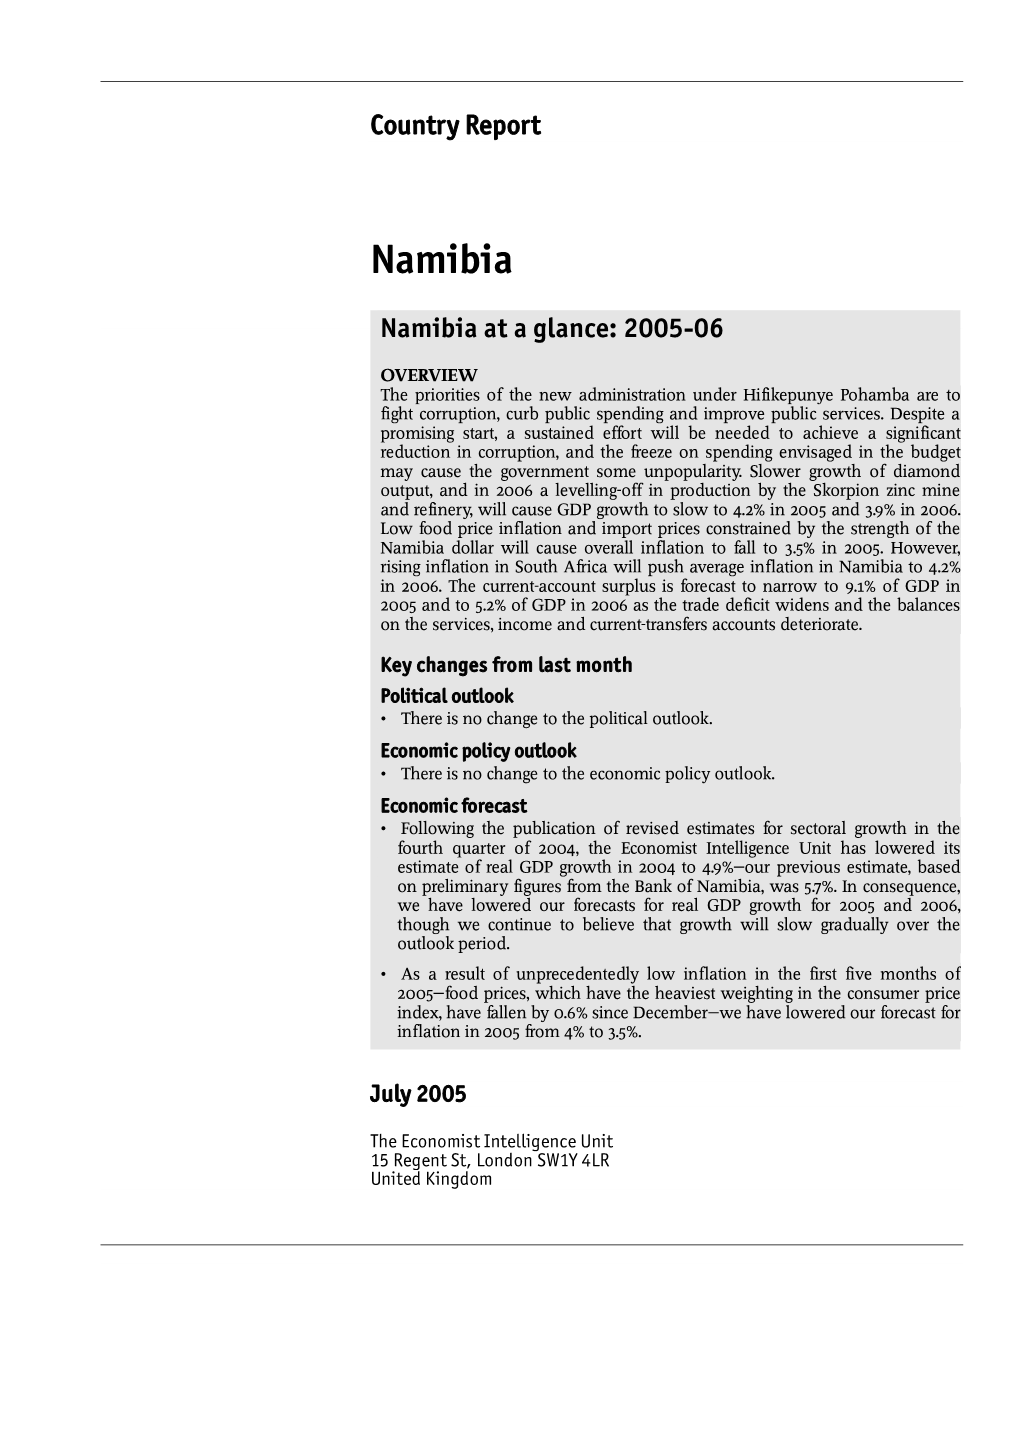 Namibia at a Glance: 2005-06